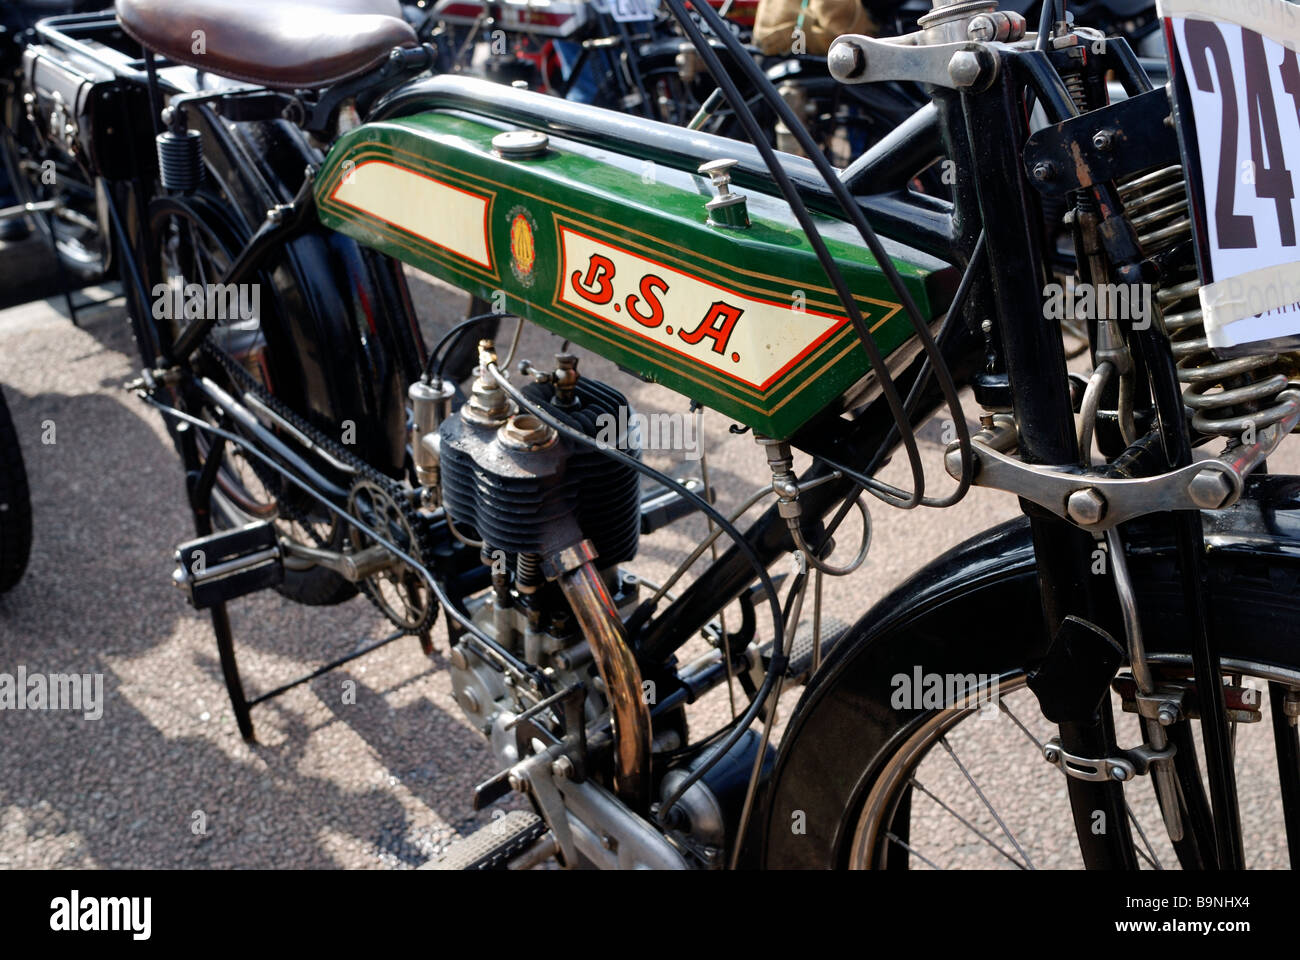 Antique Motorcycle Display High Resolution Stock Photography and Images -  Alamy